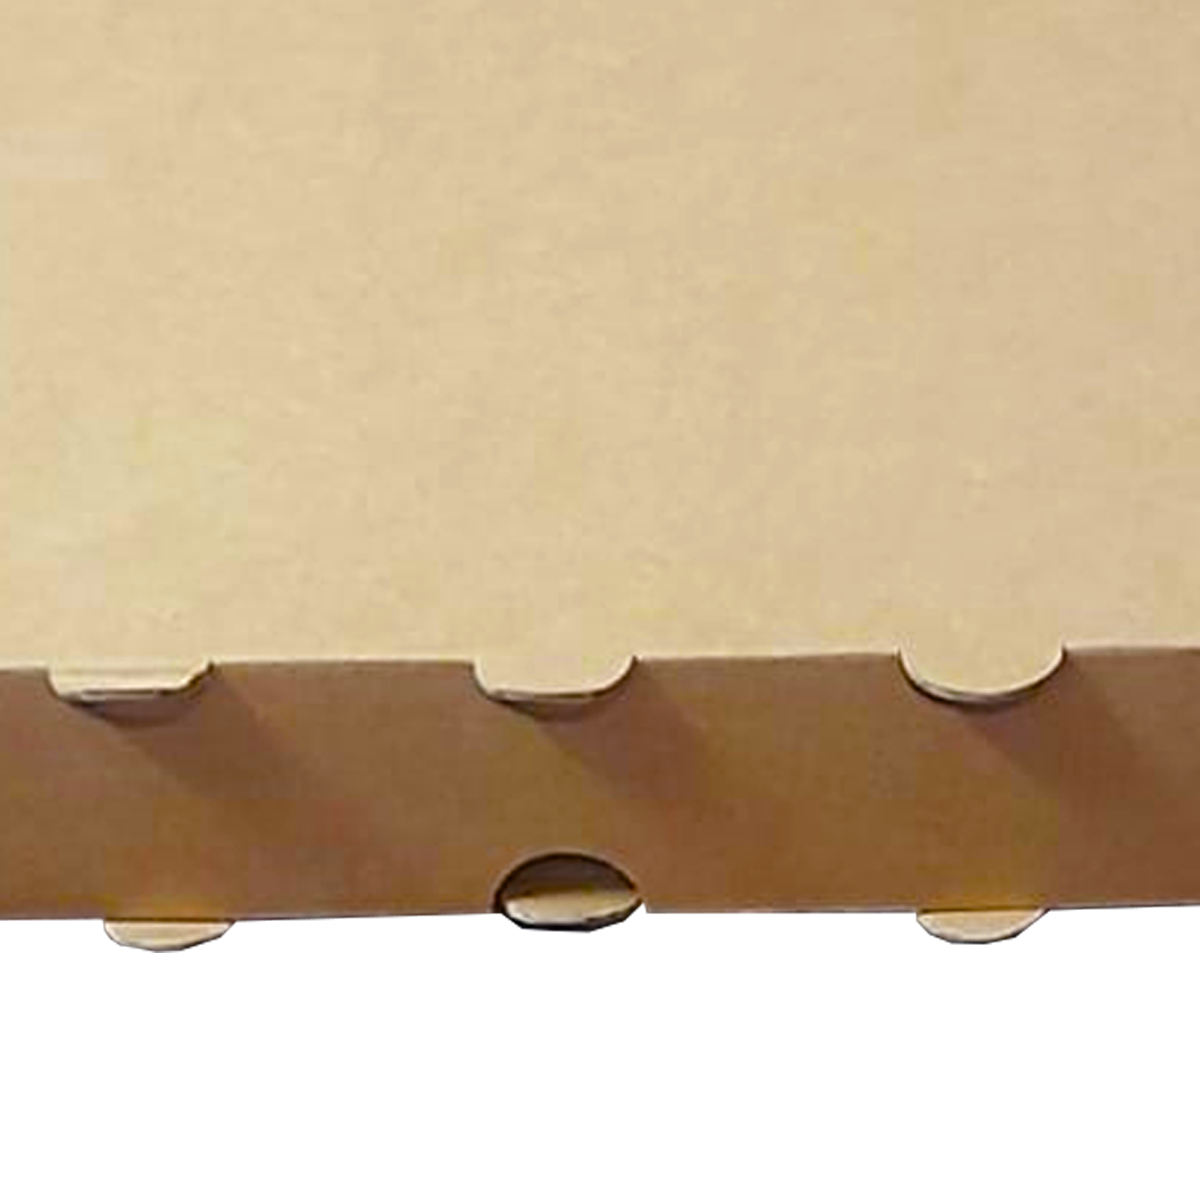 Hexagonal Corrugated Pizza Packaging Box (25 pack) 11 Inches